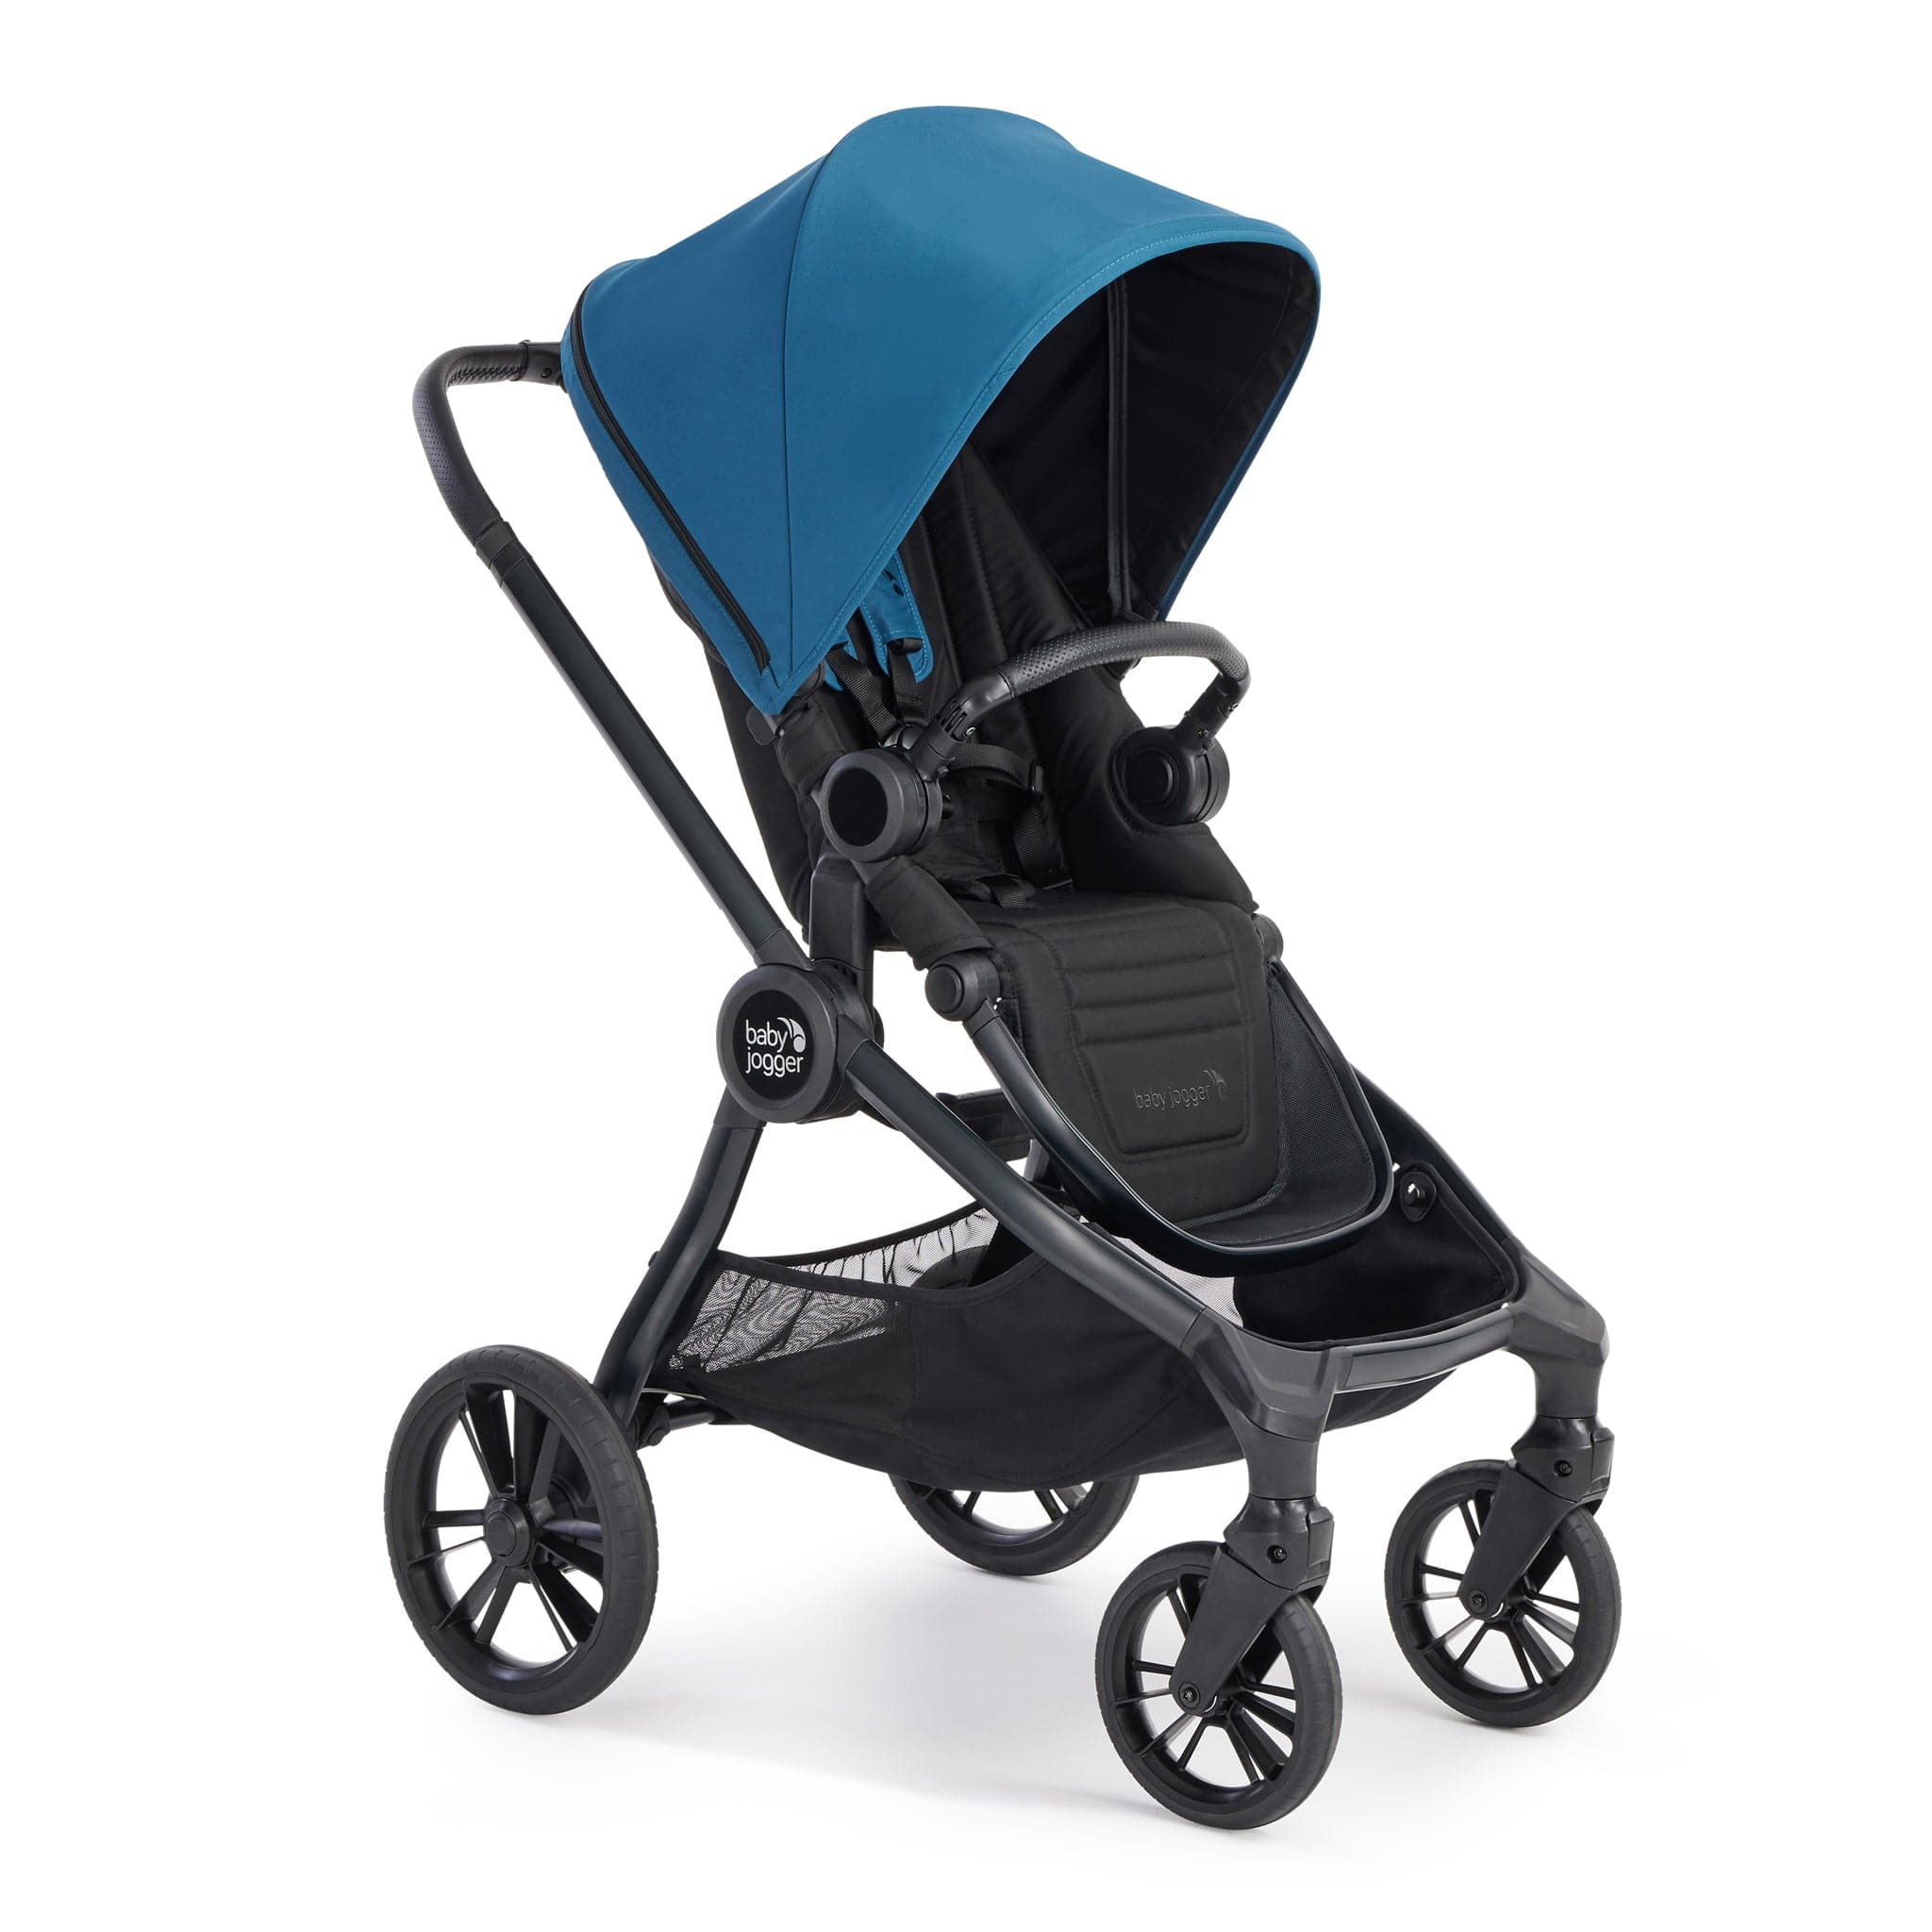 Baby Jogger City Sights Cabriofix i-Size Bundle in Deep Teal Pushchairs & Buggies CIT-TEL-11827-CAB 0047406183692